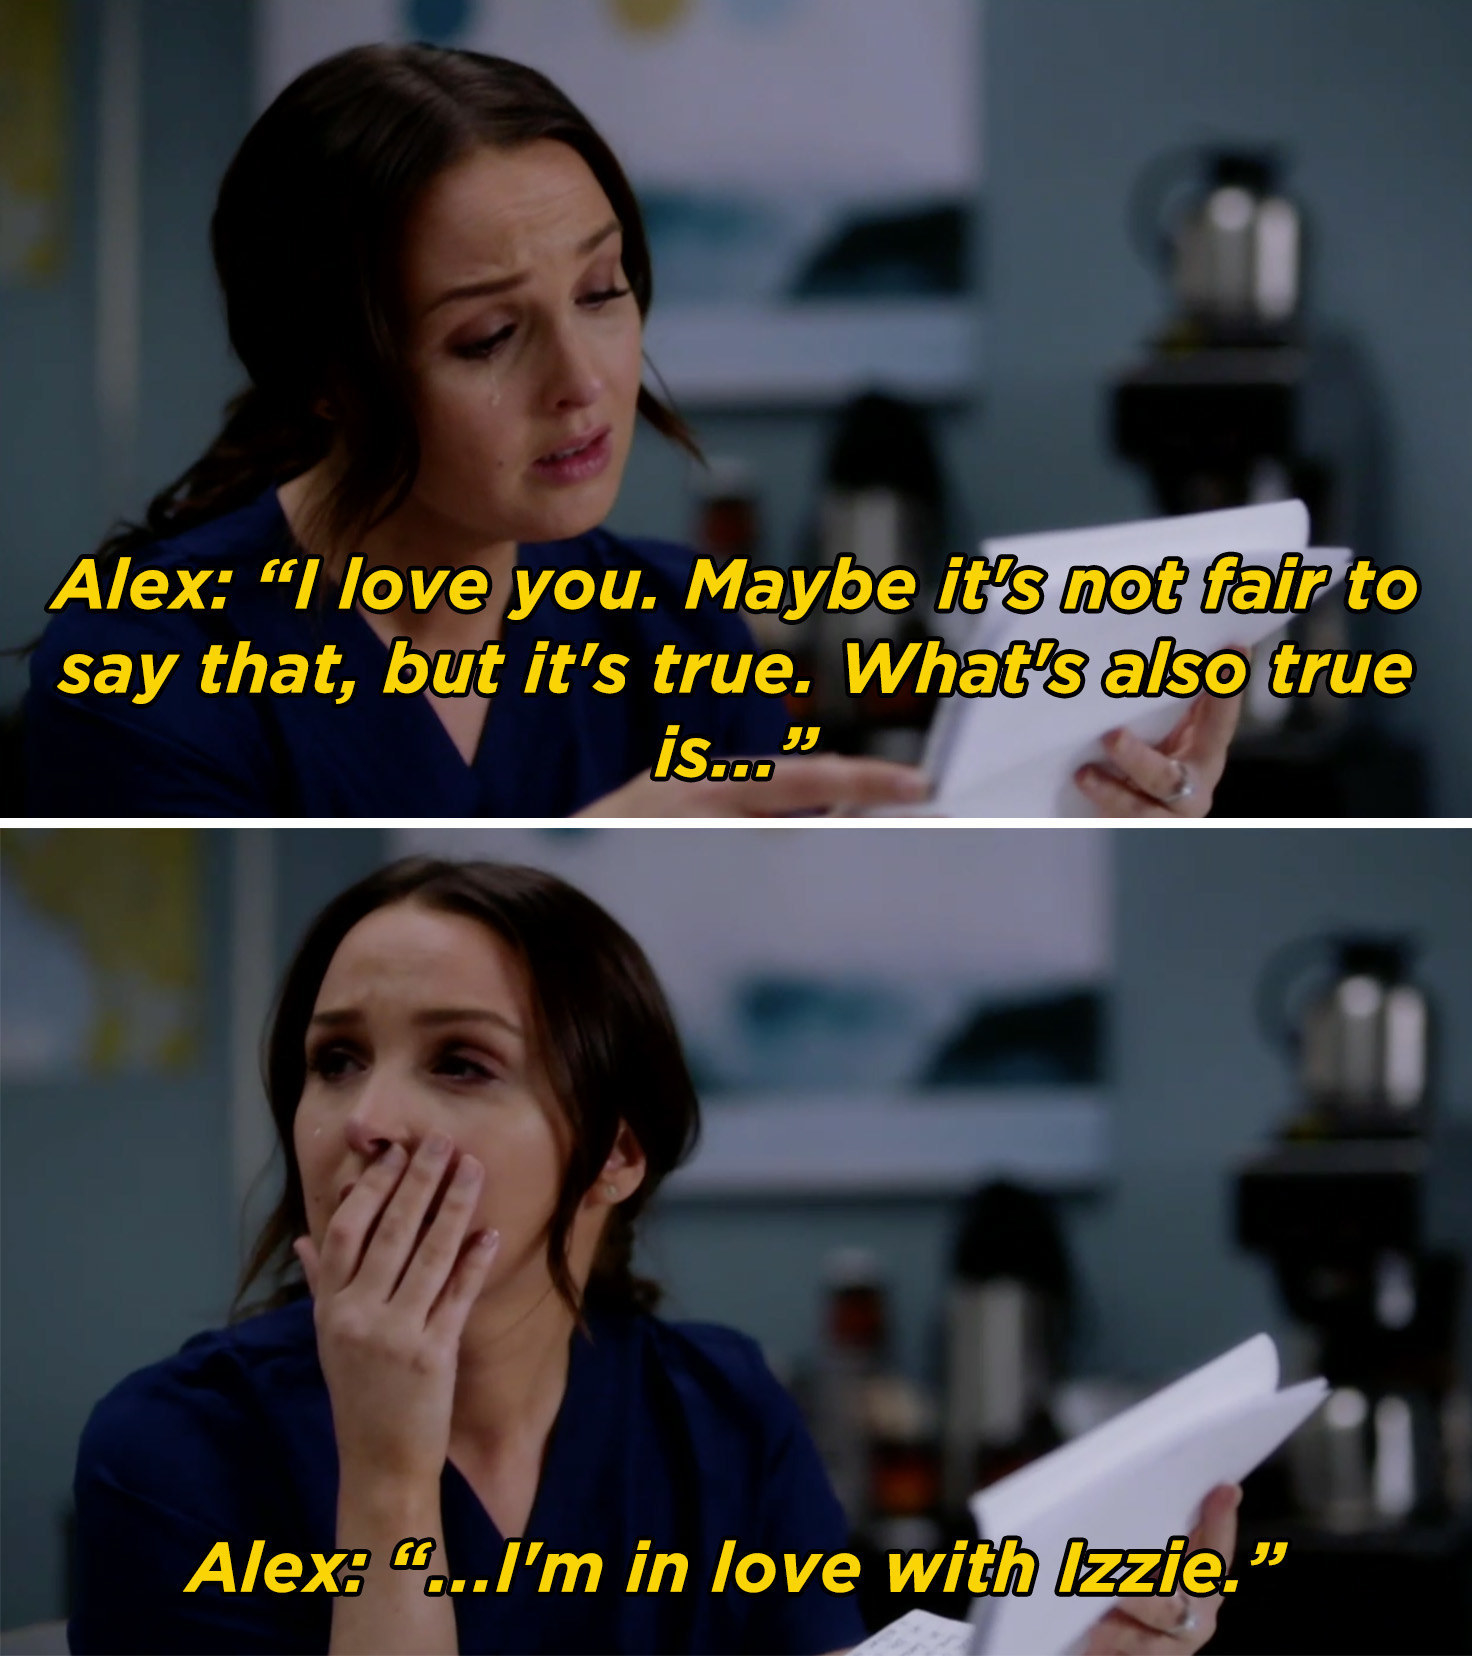 alex&#x27;s letter being read by another character, confessing he was also in love with Izzie